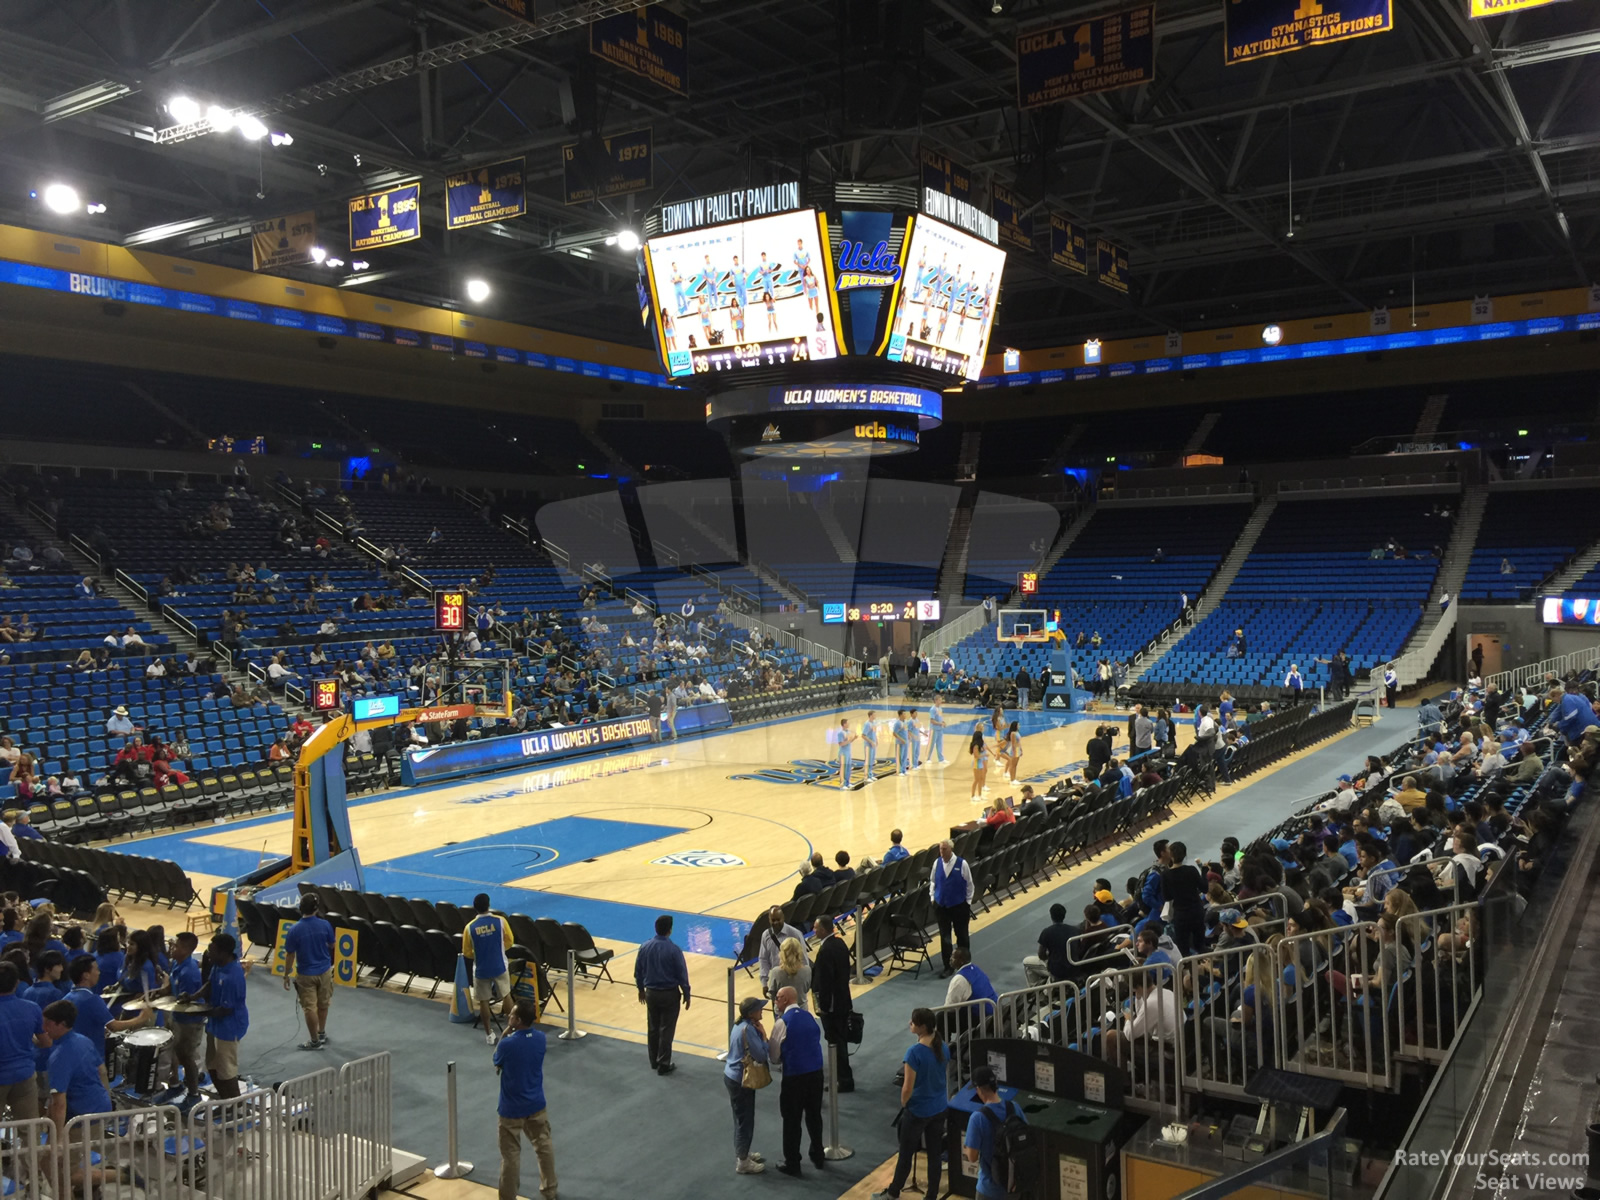 section 119, row 3 seat view  - pauley pavilion